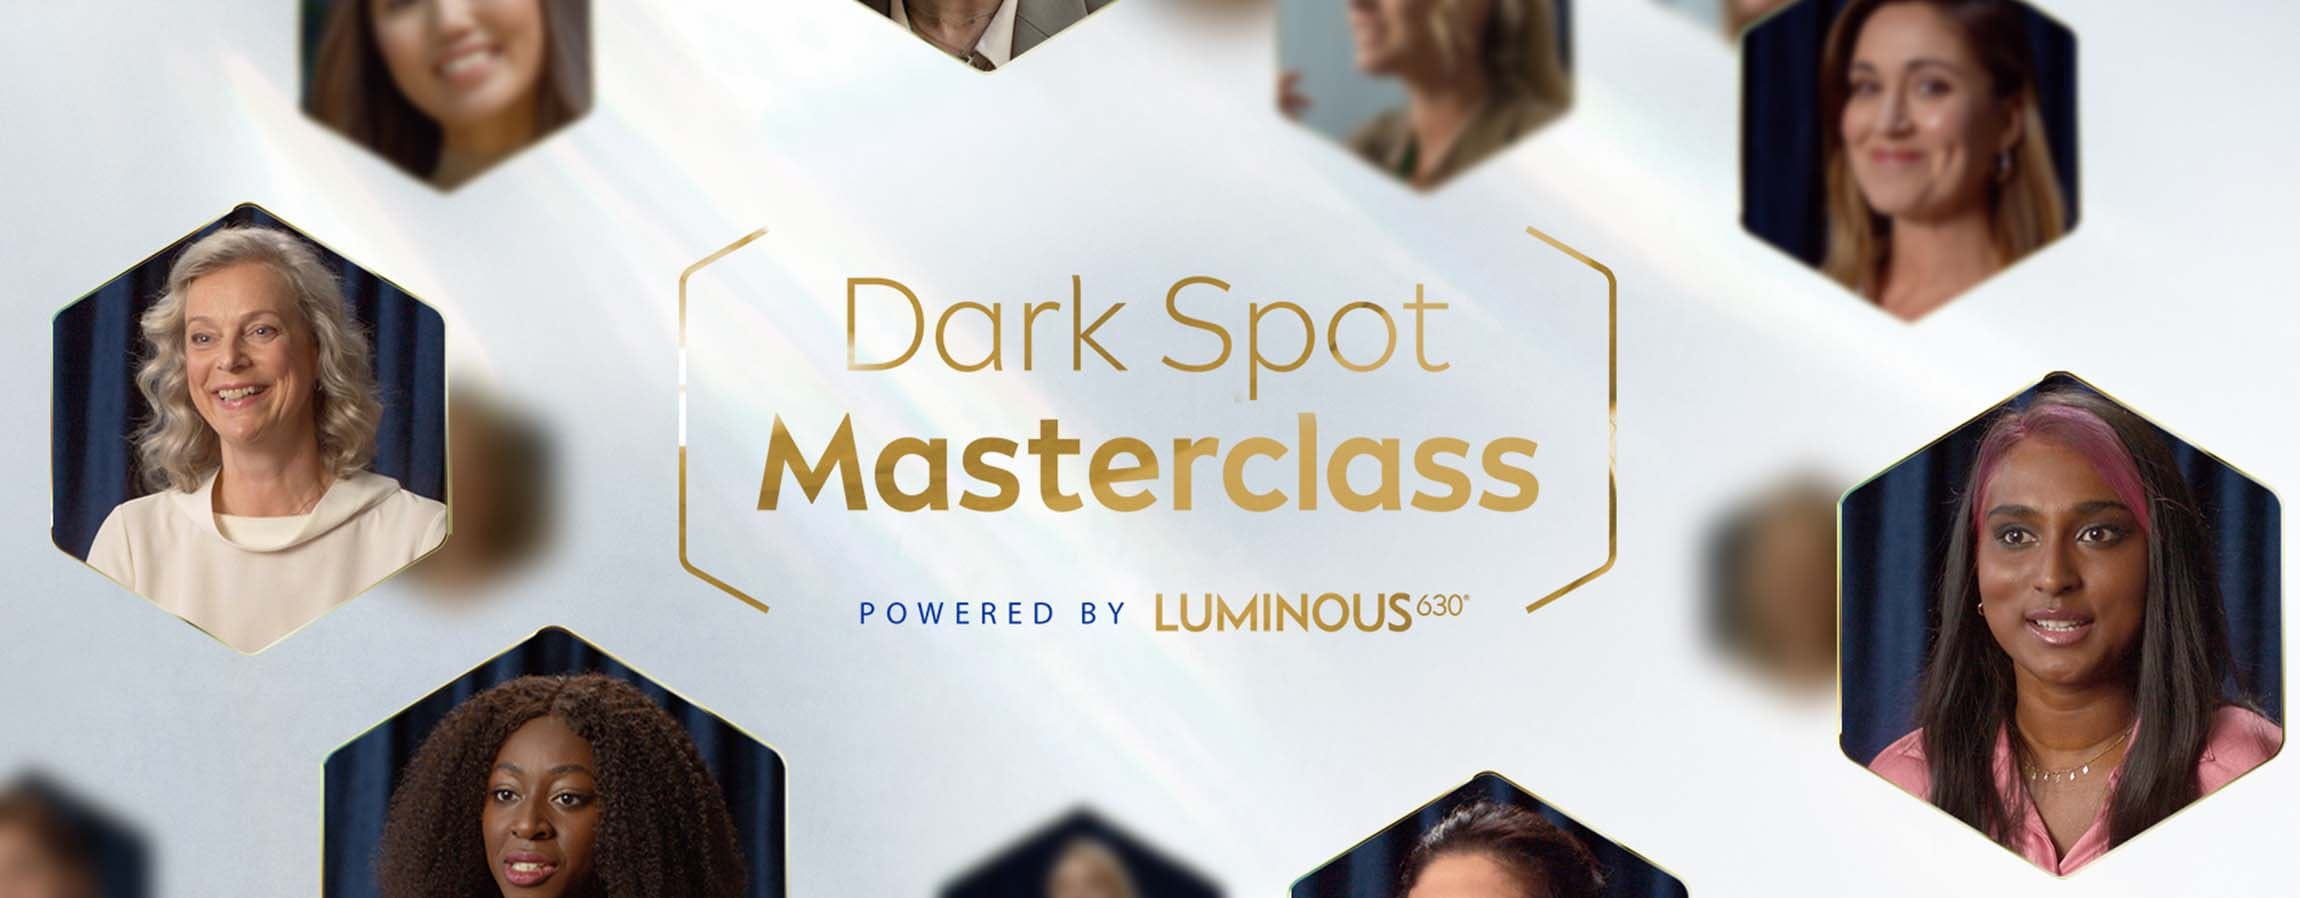 View of multiple people's headshots inside hexagonal shapes, against a white background.Dark Spot Masterclass by Luminous630